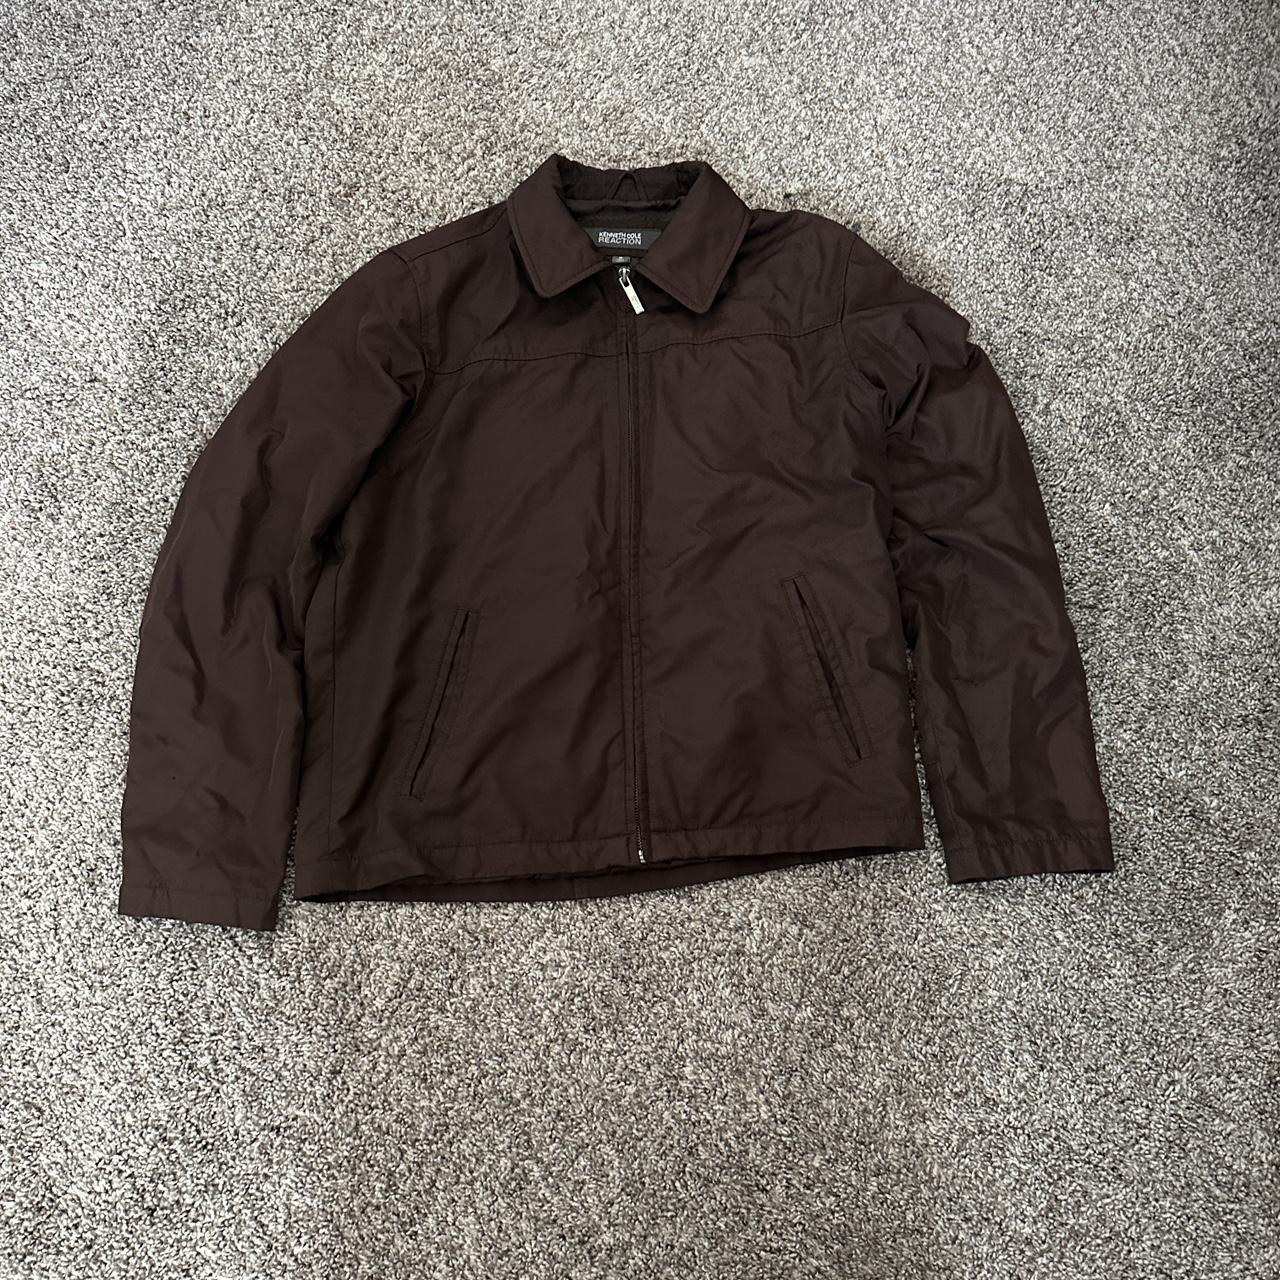 Kenneth Cole Bomber jacket. Great condition on... - Depop